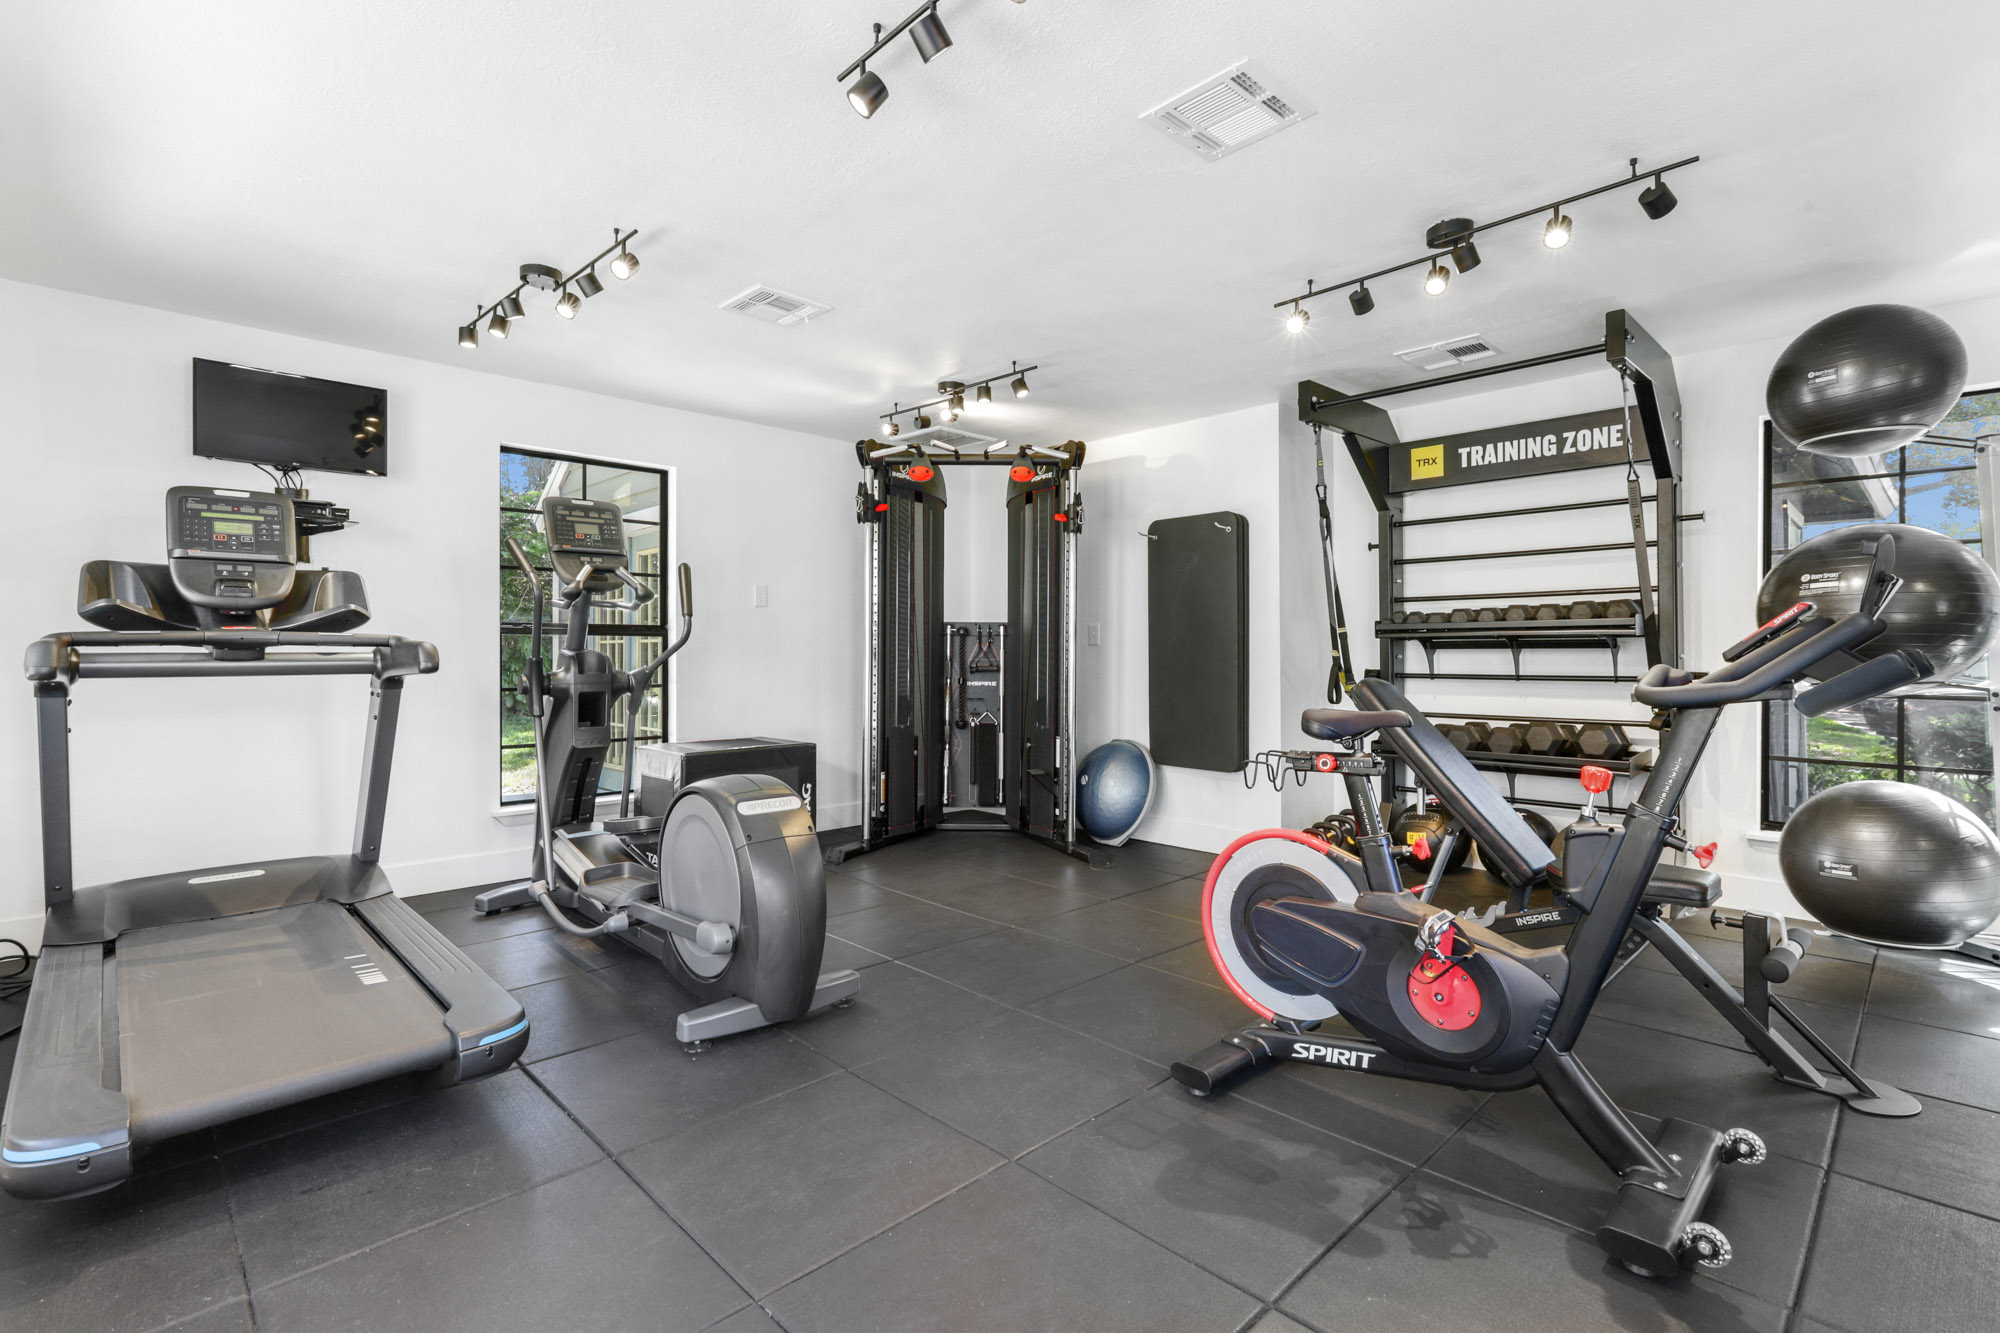 The fitness center at St. James Crossing apartments in Tampa, Florida.